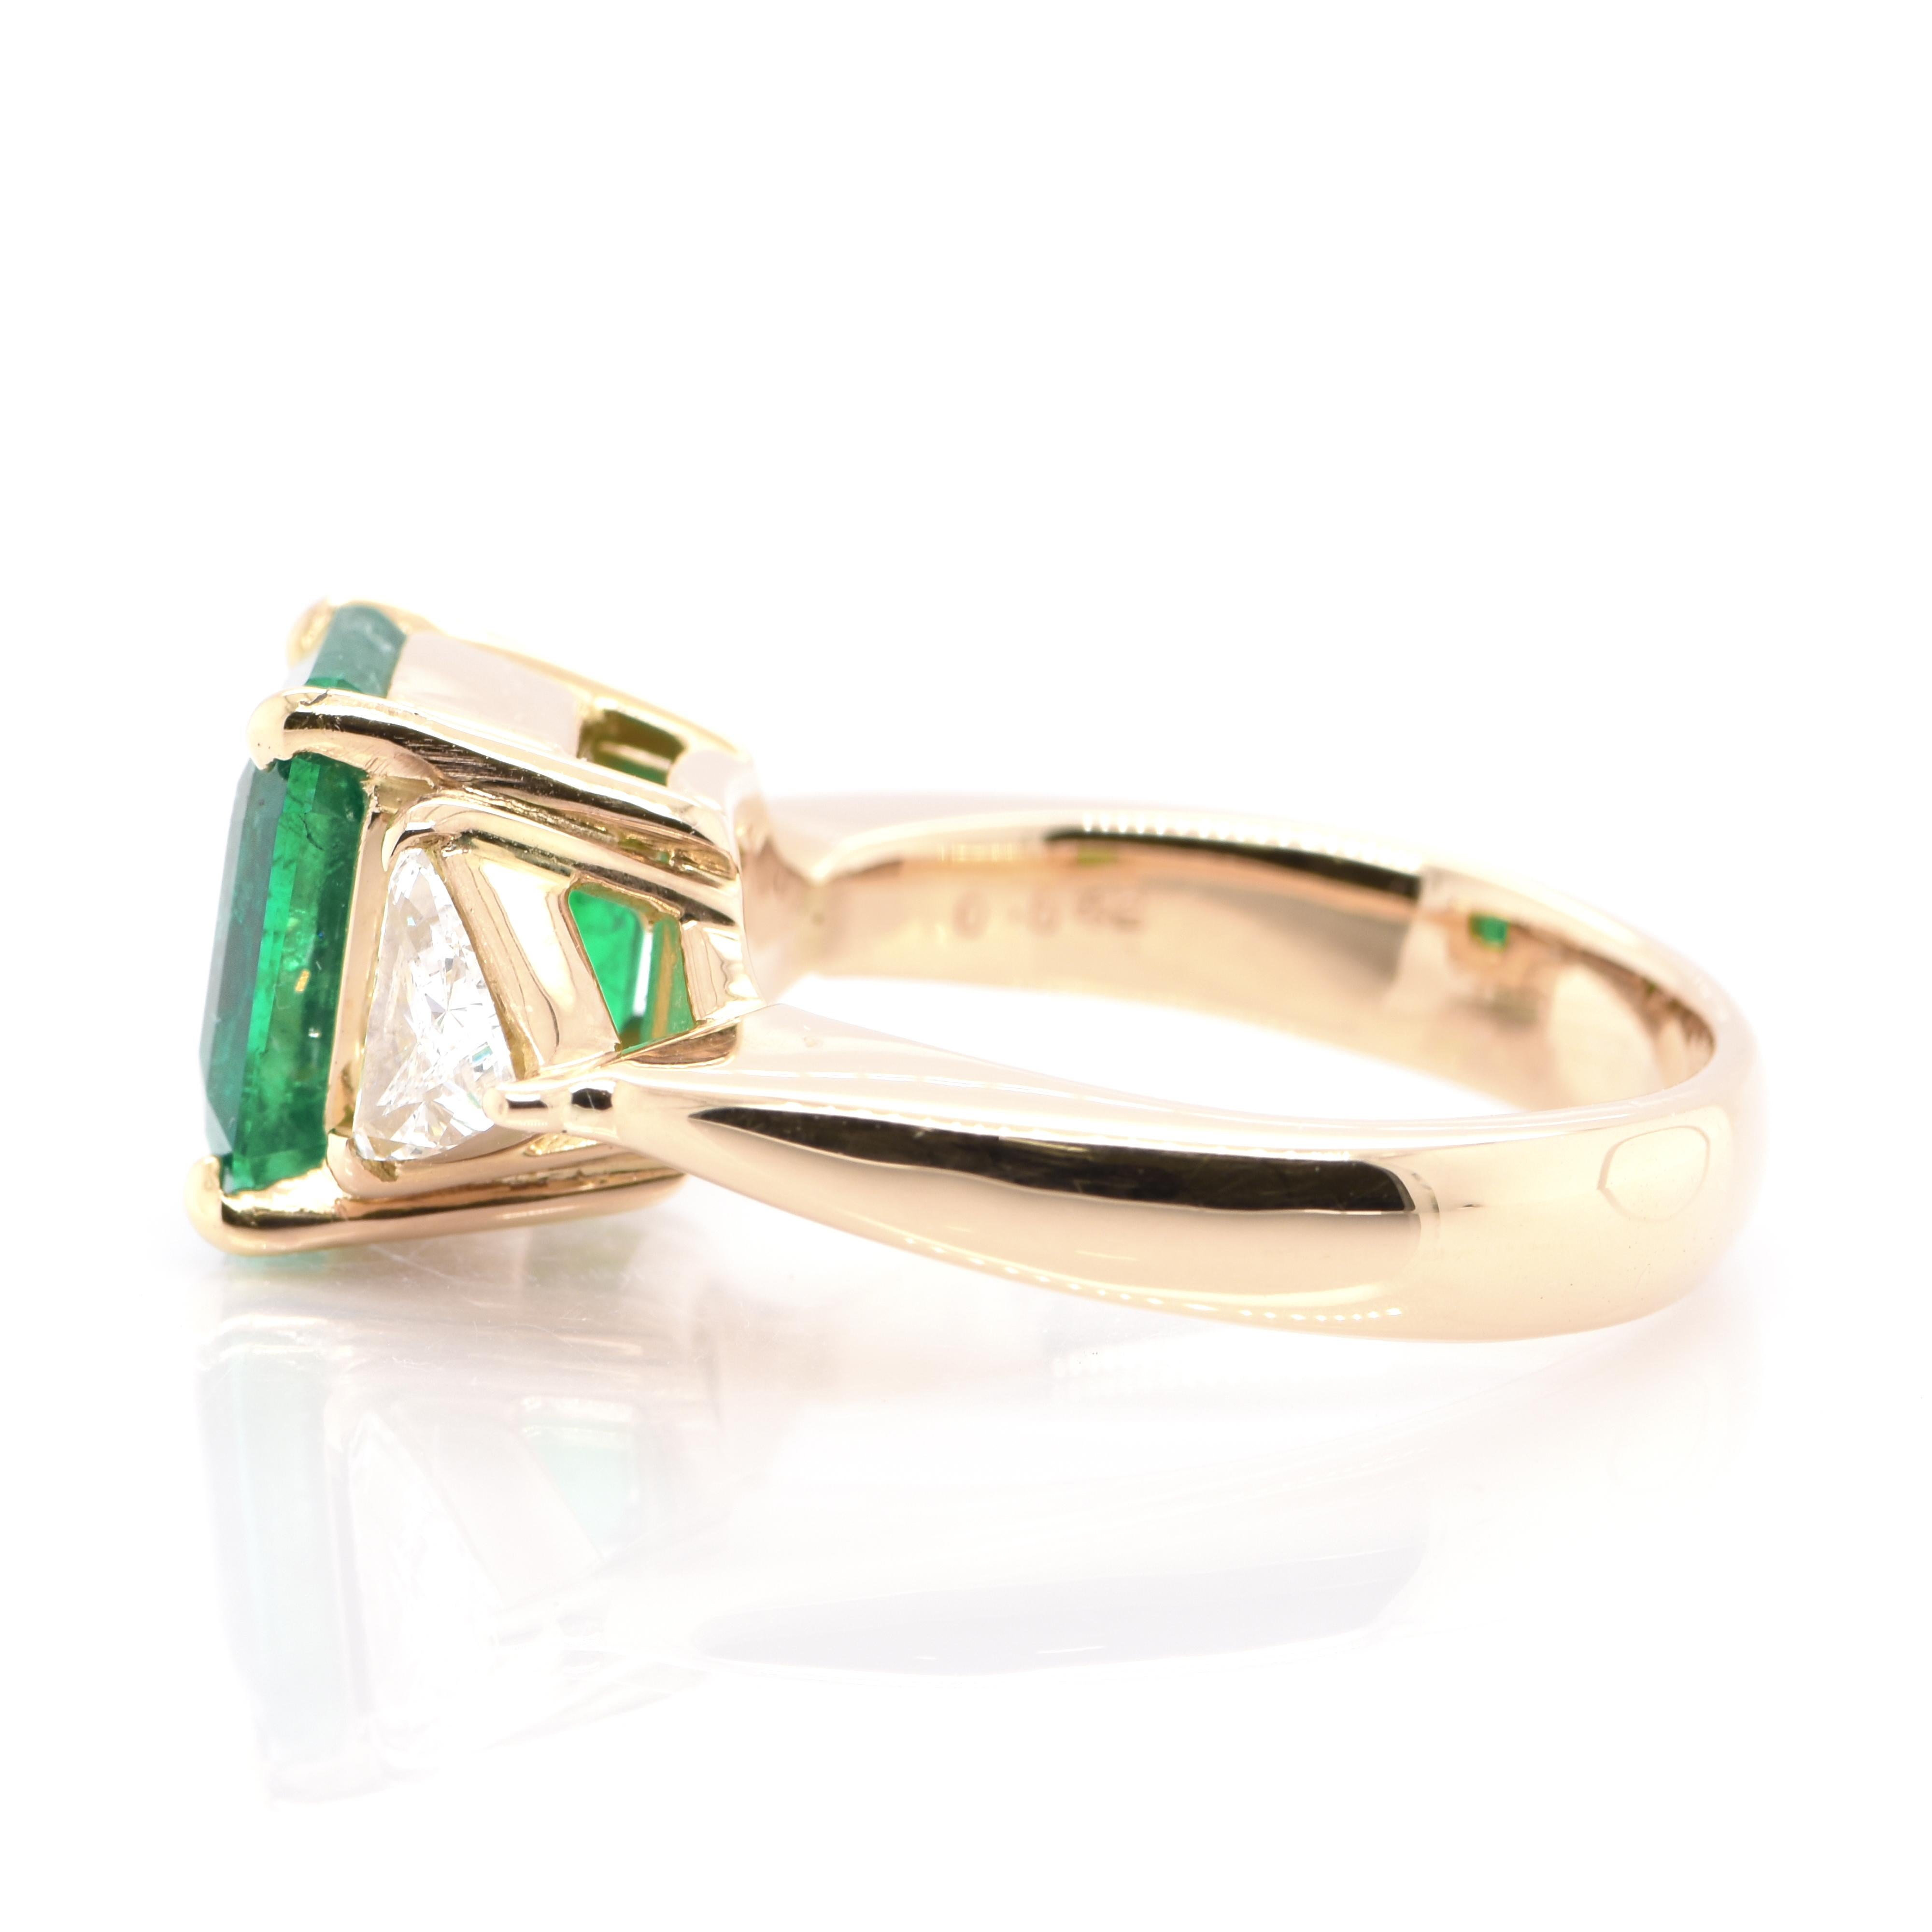 Emerald Cut 4.30 Carat Natural Colombian Emerald and Diamond Ring Set in 18 Karat Gold For Sale